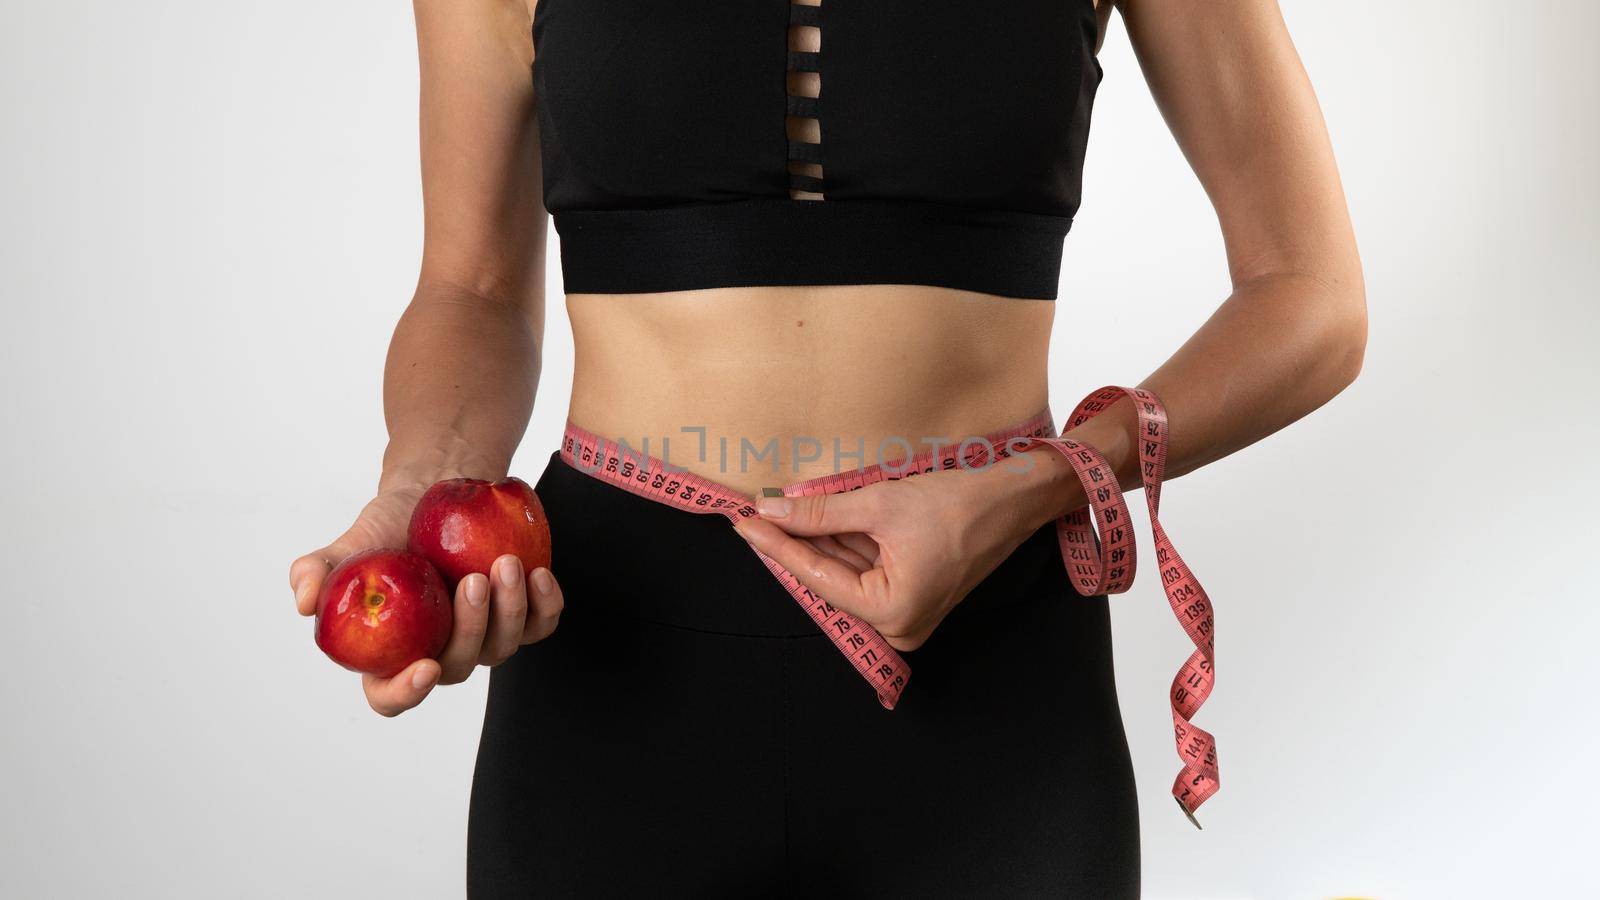 A woman with a slender figure measures her waist with a measuring tape, fruit in her hands. High quality photo